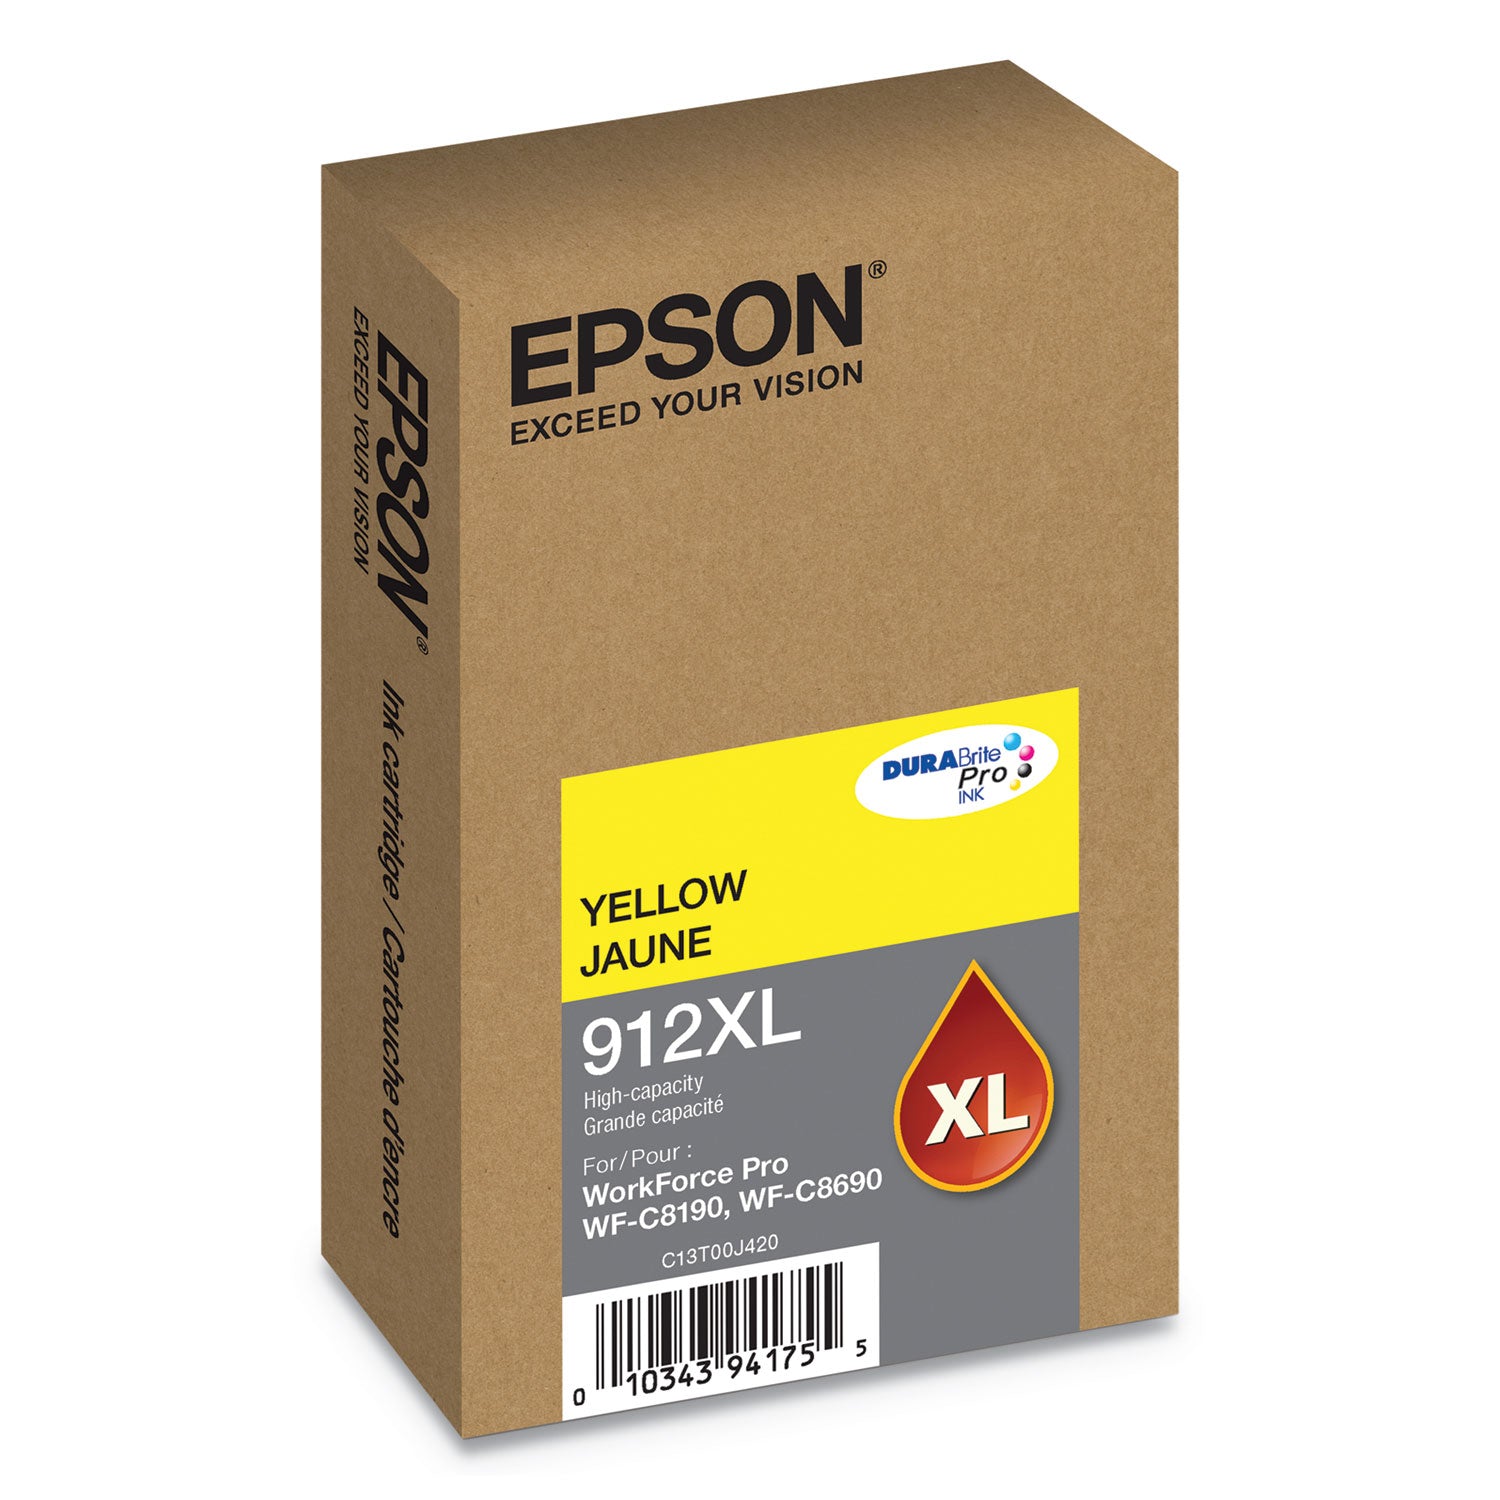 t912xl420-912xl-durabrite-pro-high-yield-ink-4600-page-yield-yellow_epst912xl420 - 2